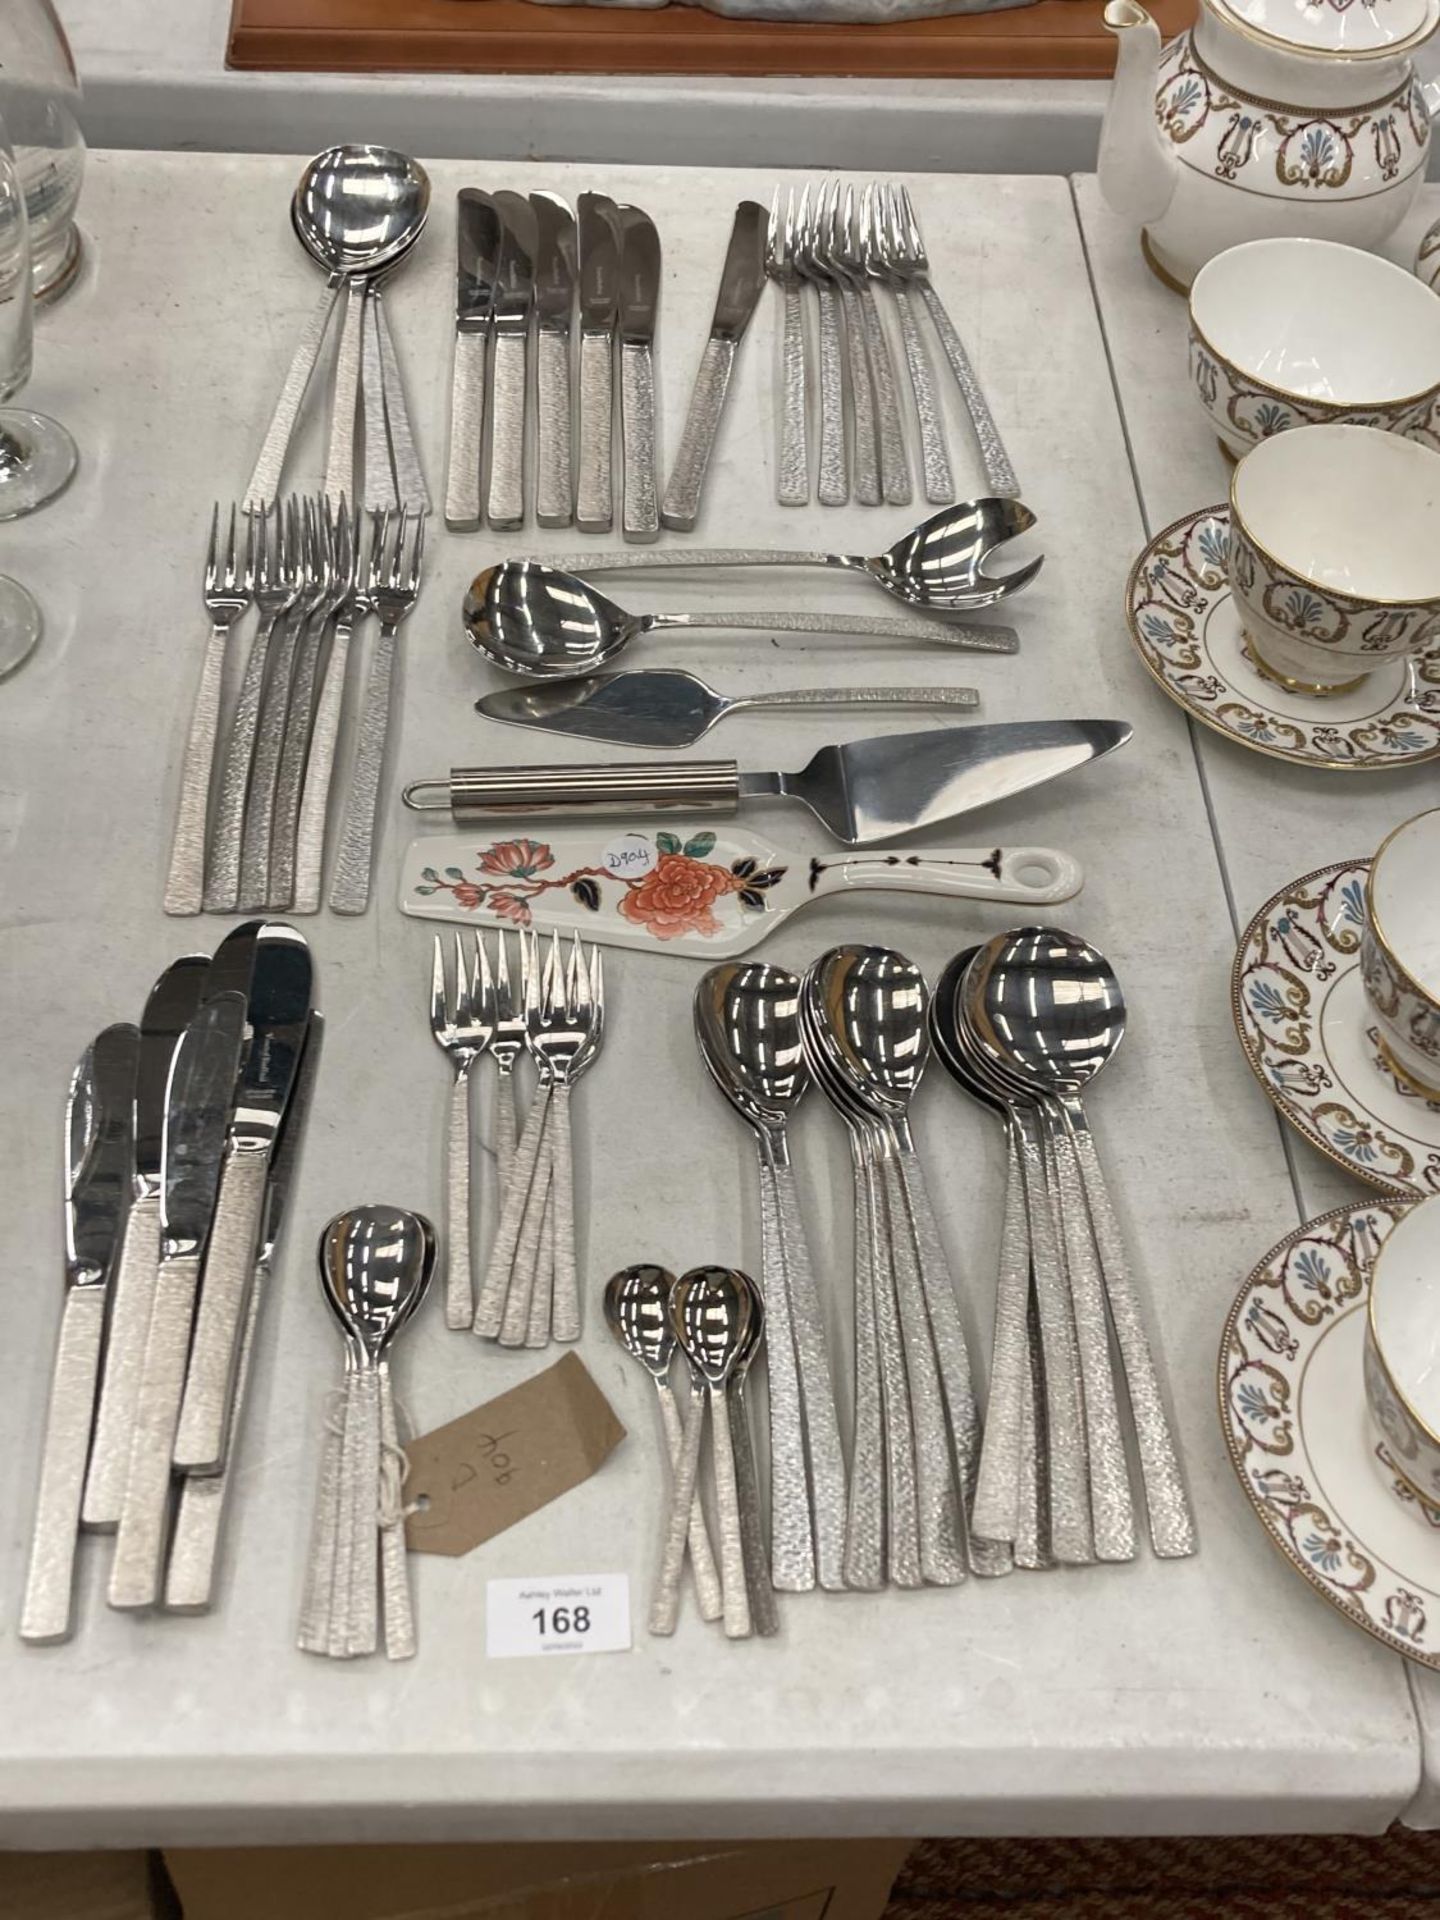 A QUANTITY OF FLATWARE TO INCLUDE KNIVES, FORKS, SPOONS, SERVERS, ETC